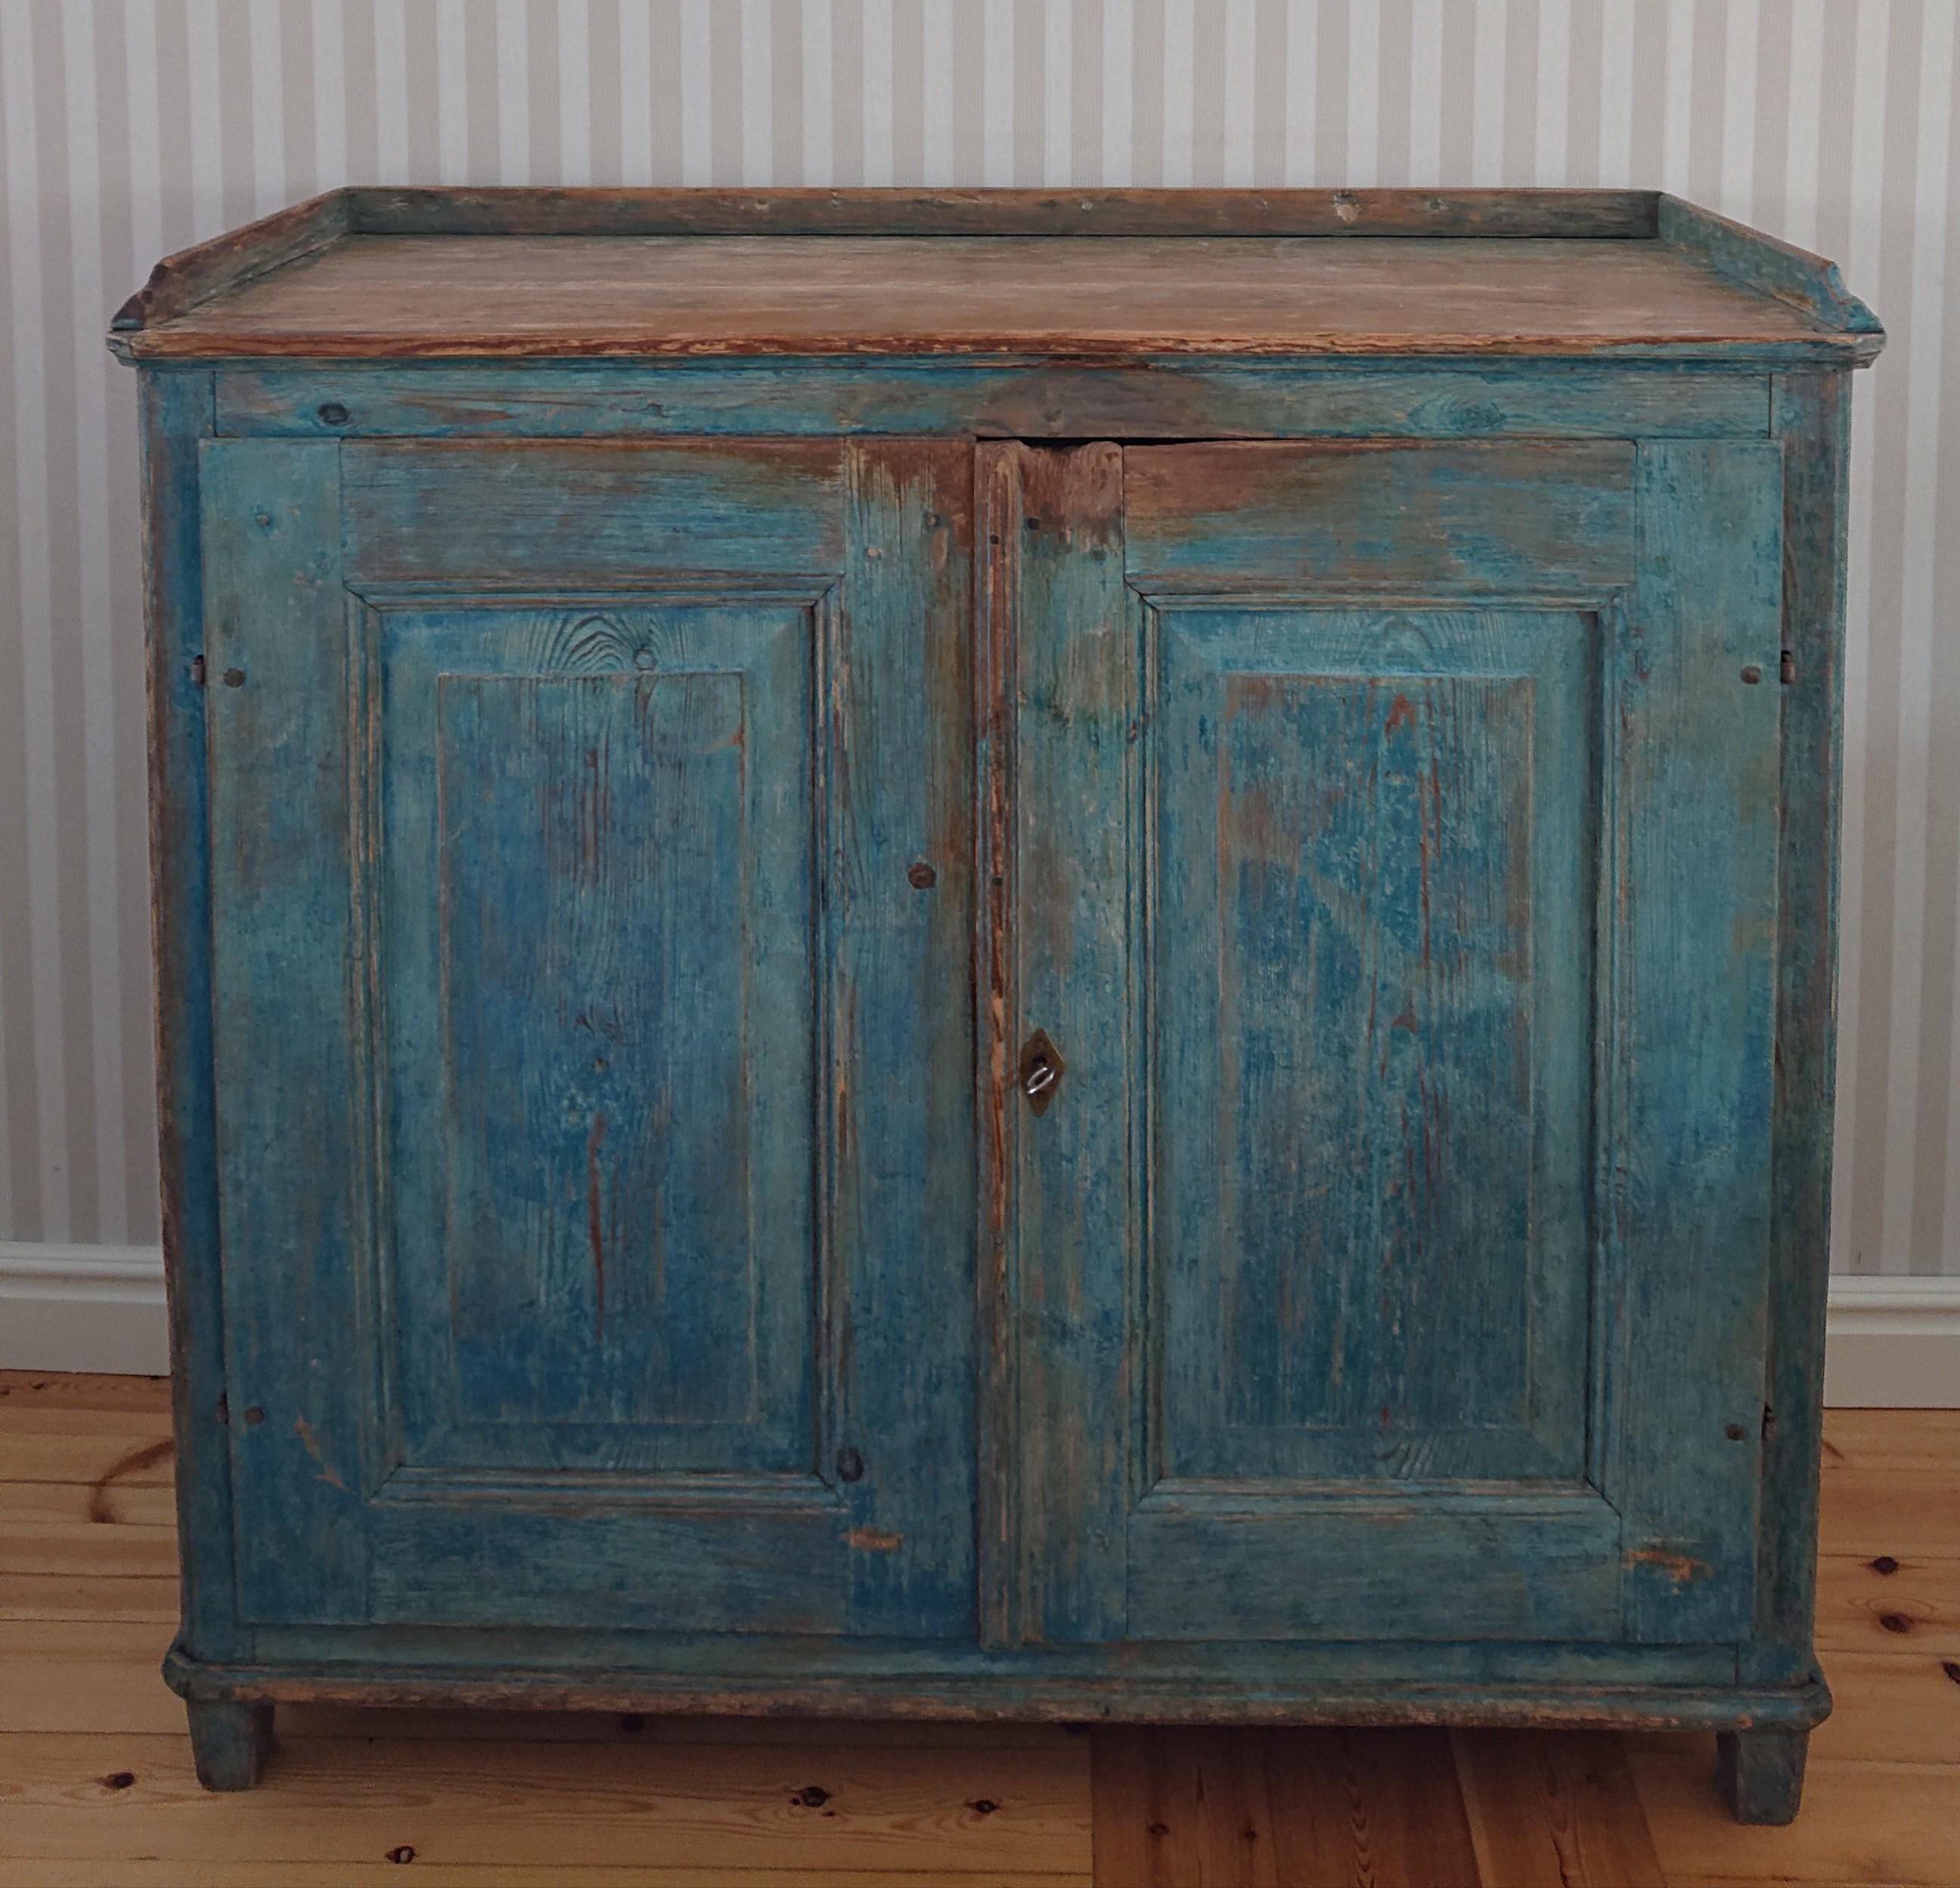 Early 19th century Swedish  Antique  Rustic Gustavian buffet from Småland, Southern Sweden.
Beautiful genuine buffet scraped by hand to its original blue color.
These doors open to reveal inner shelves offering convenient storage opportunities.
With